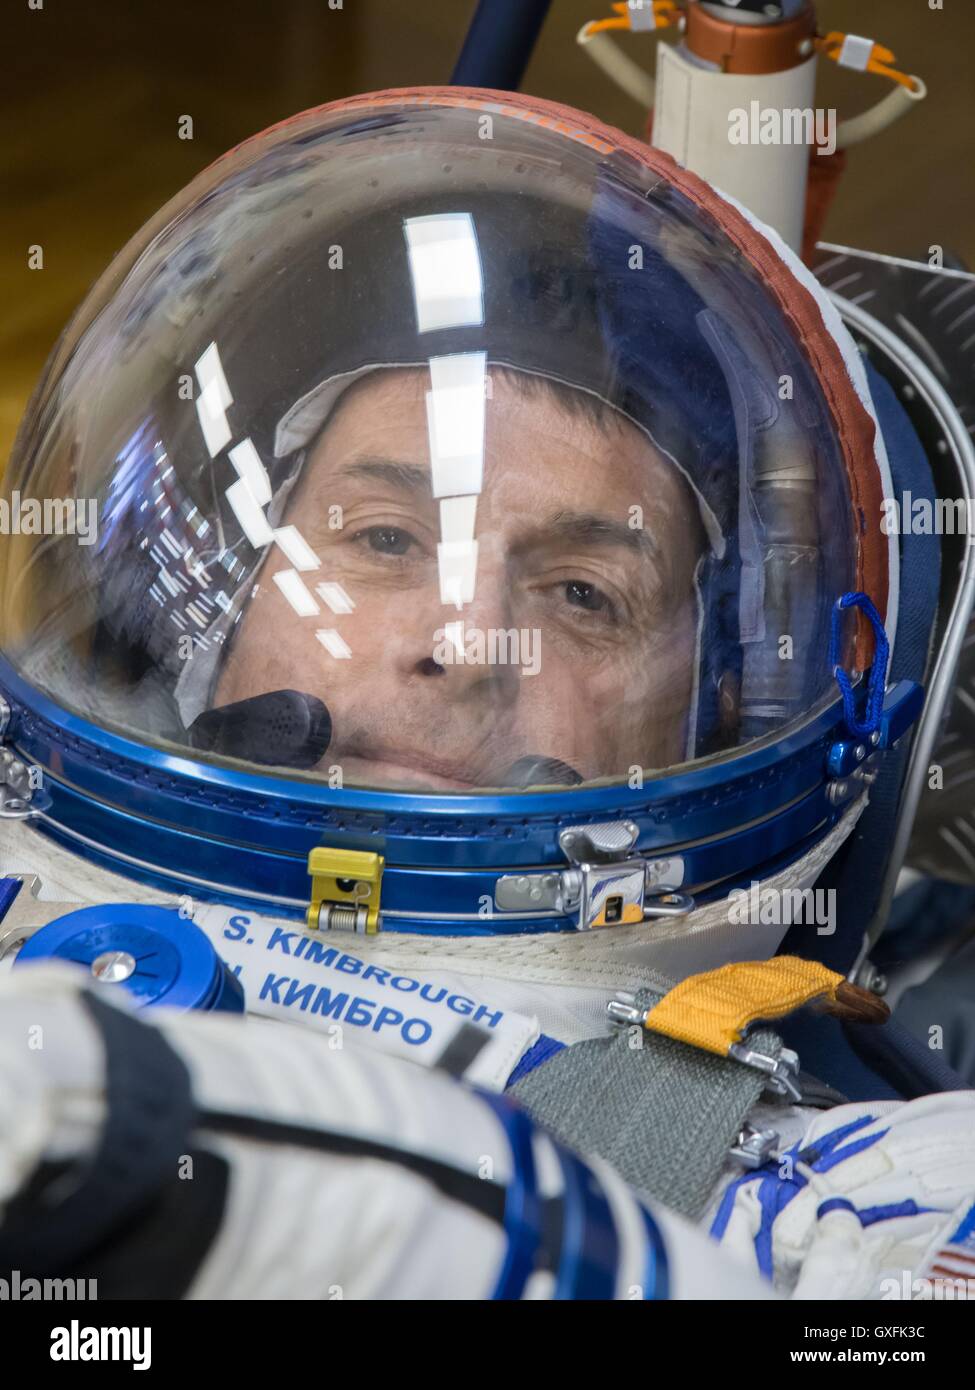 International Space Station Expedition 49 crew member NASA astronaut Shane Kimbrough undergoes a pressure test on his Sokol launch and entry suit during a pre-launch training fit check at the Baikonur Cosmodrome Integration Facility September 9, 2016 in Kazakhstan. Stock Photo